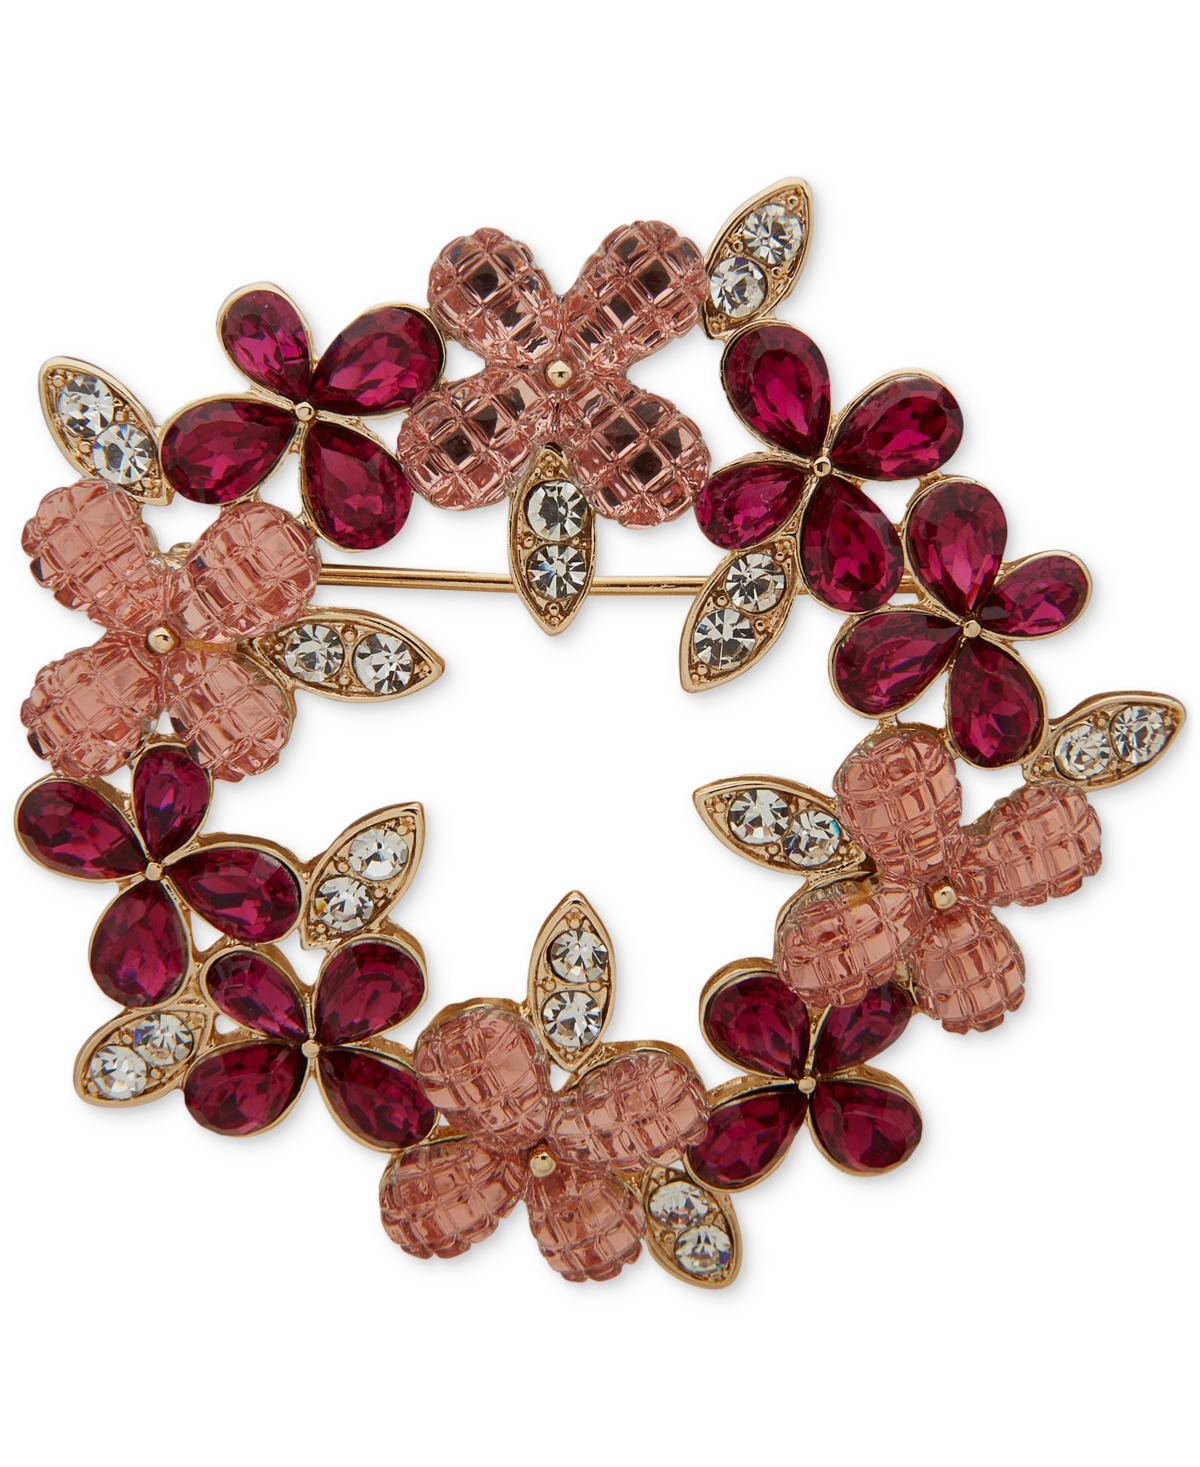 Gold-Tone Crystal & Stone Flower Wreath Pin - Pink